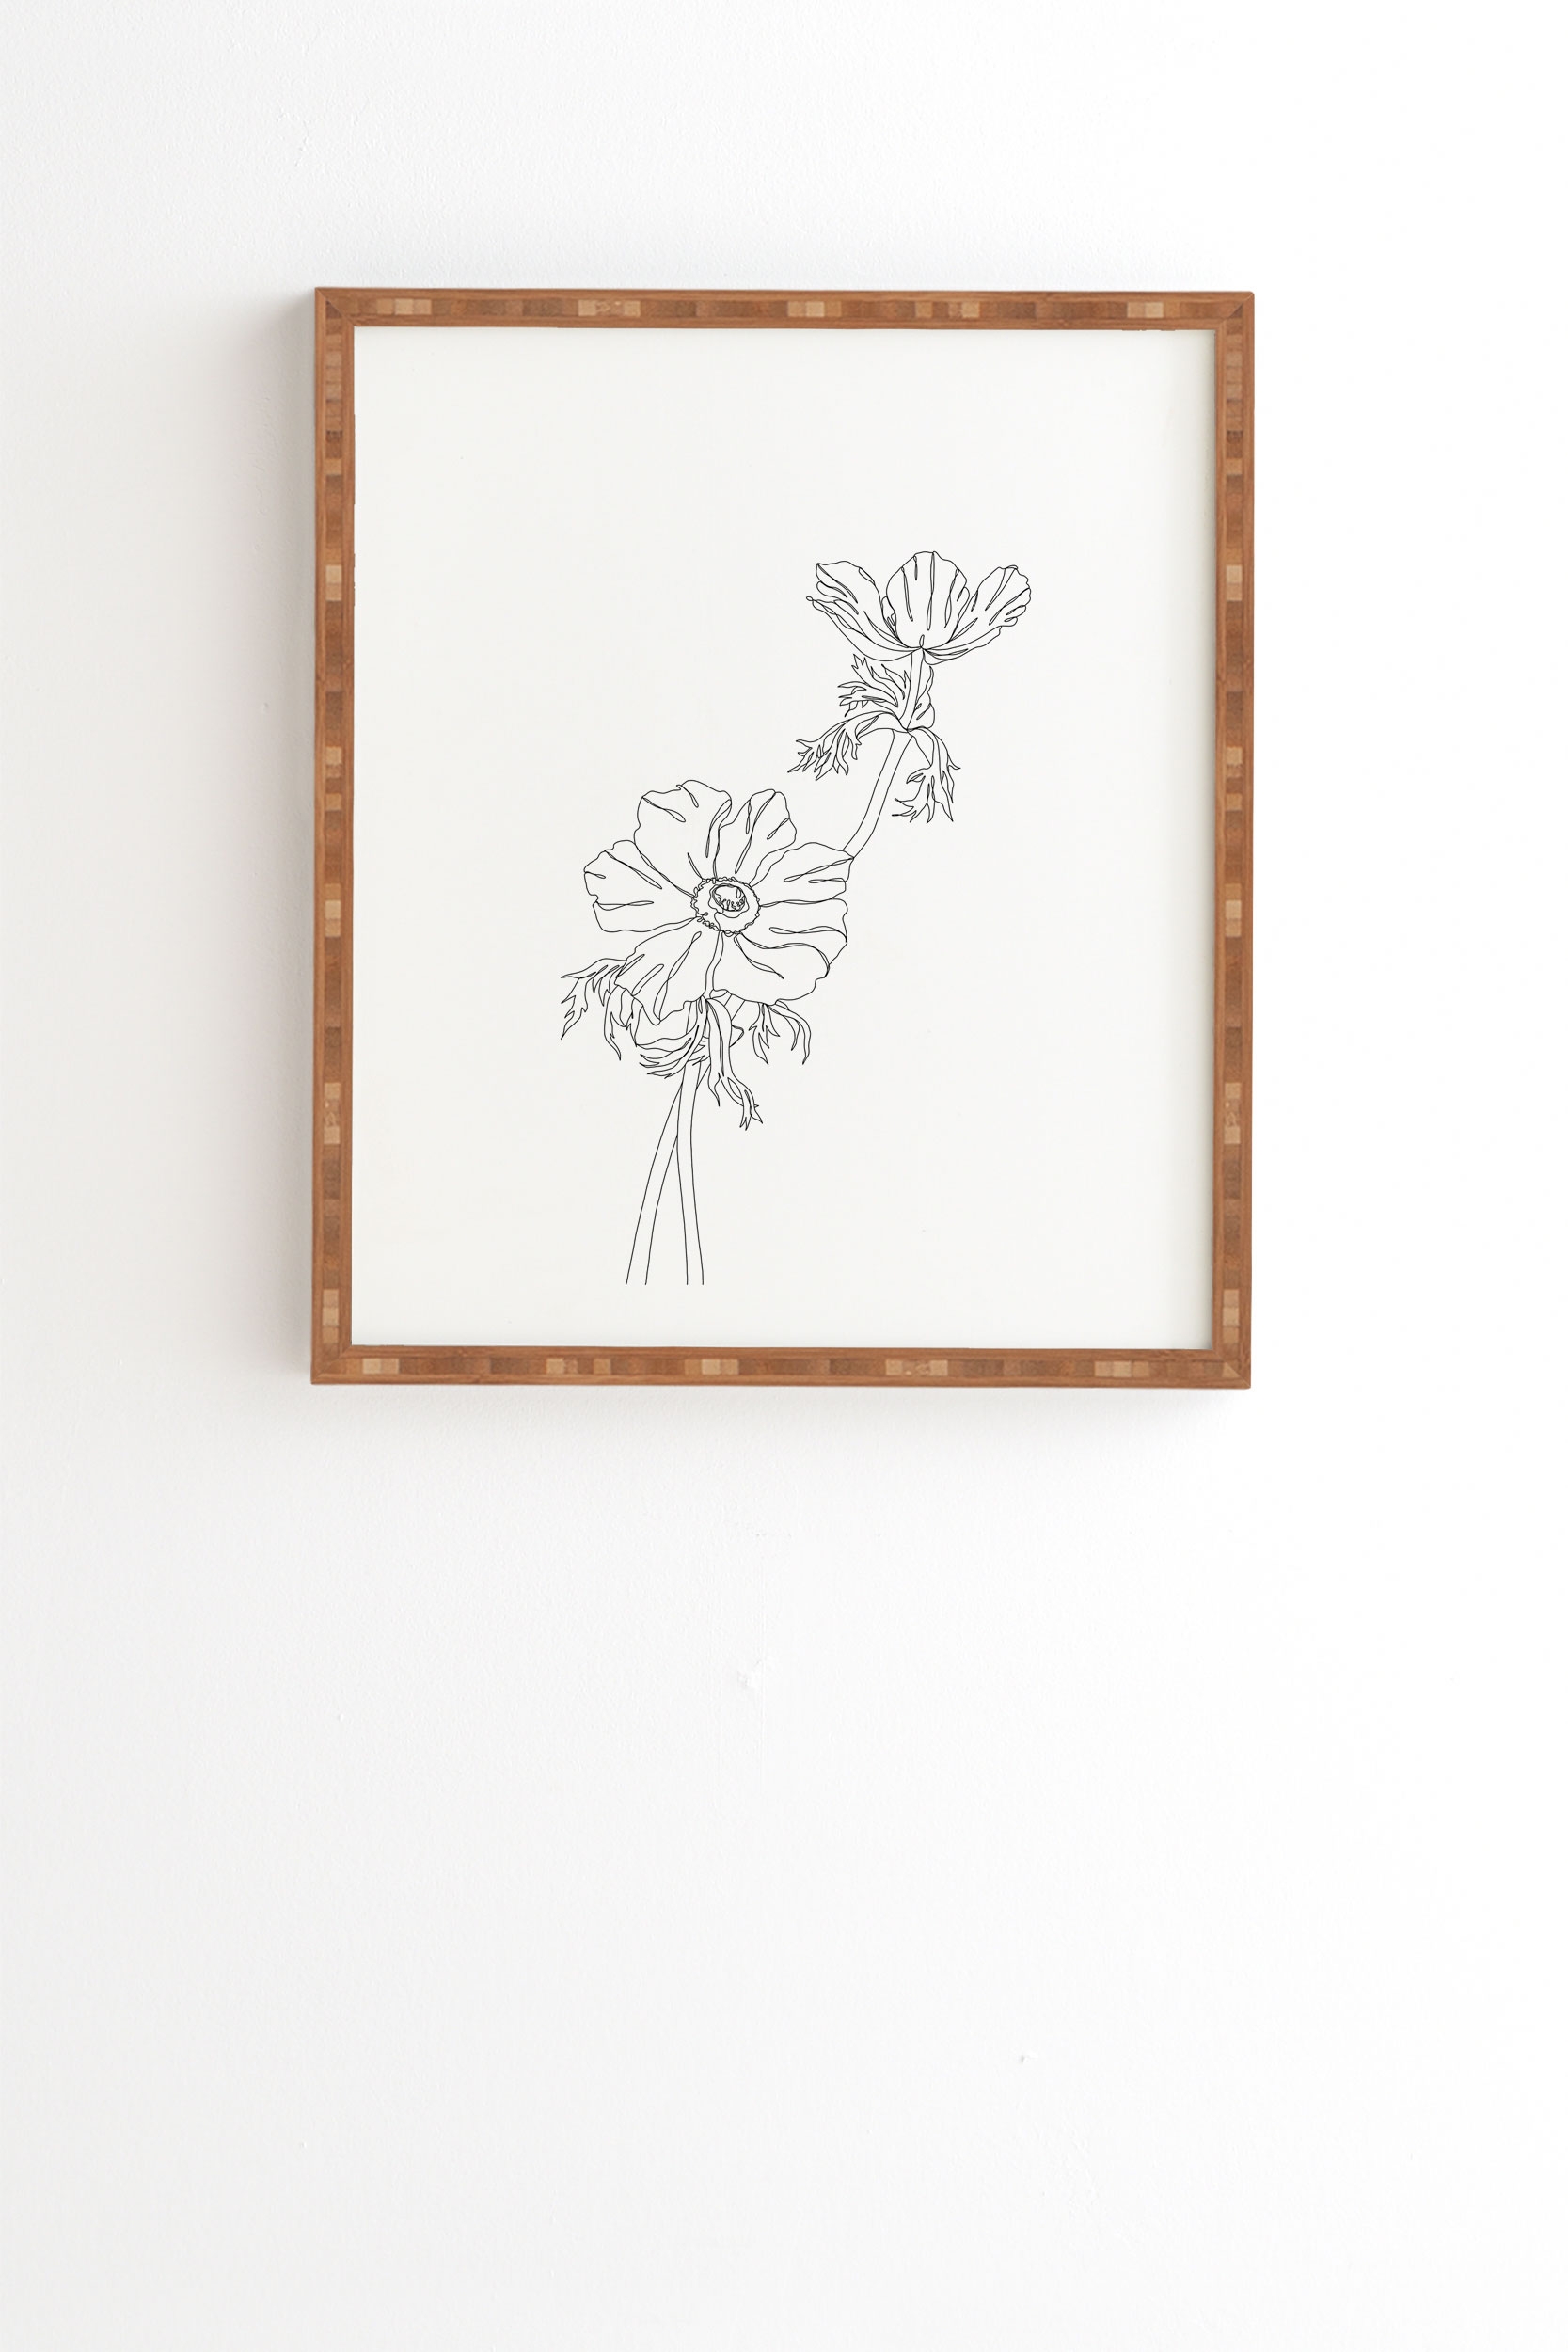 Botanical Illustration Joan by The Colour Study - Framed Wall Art Bamboo 14" x 16.5" - Image 0